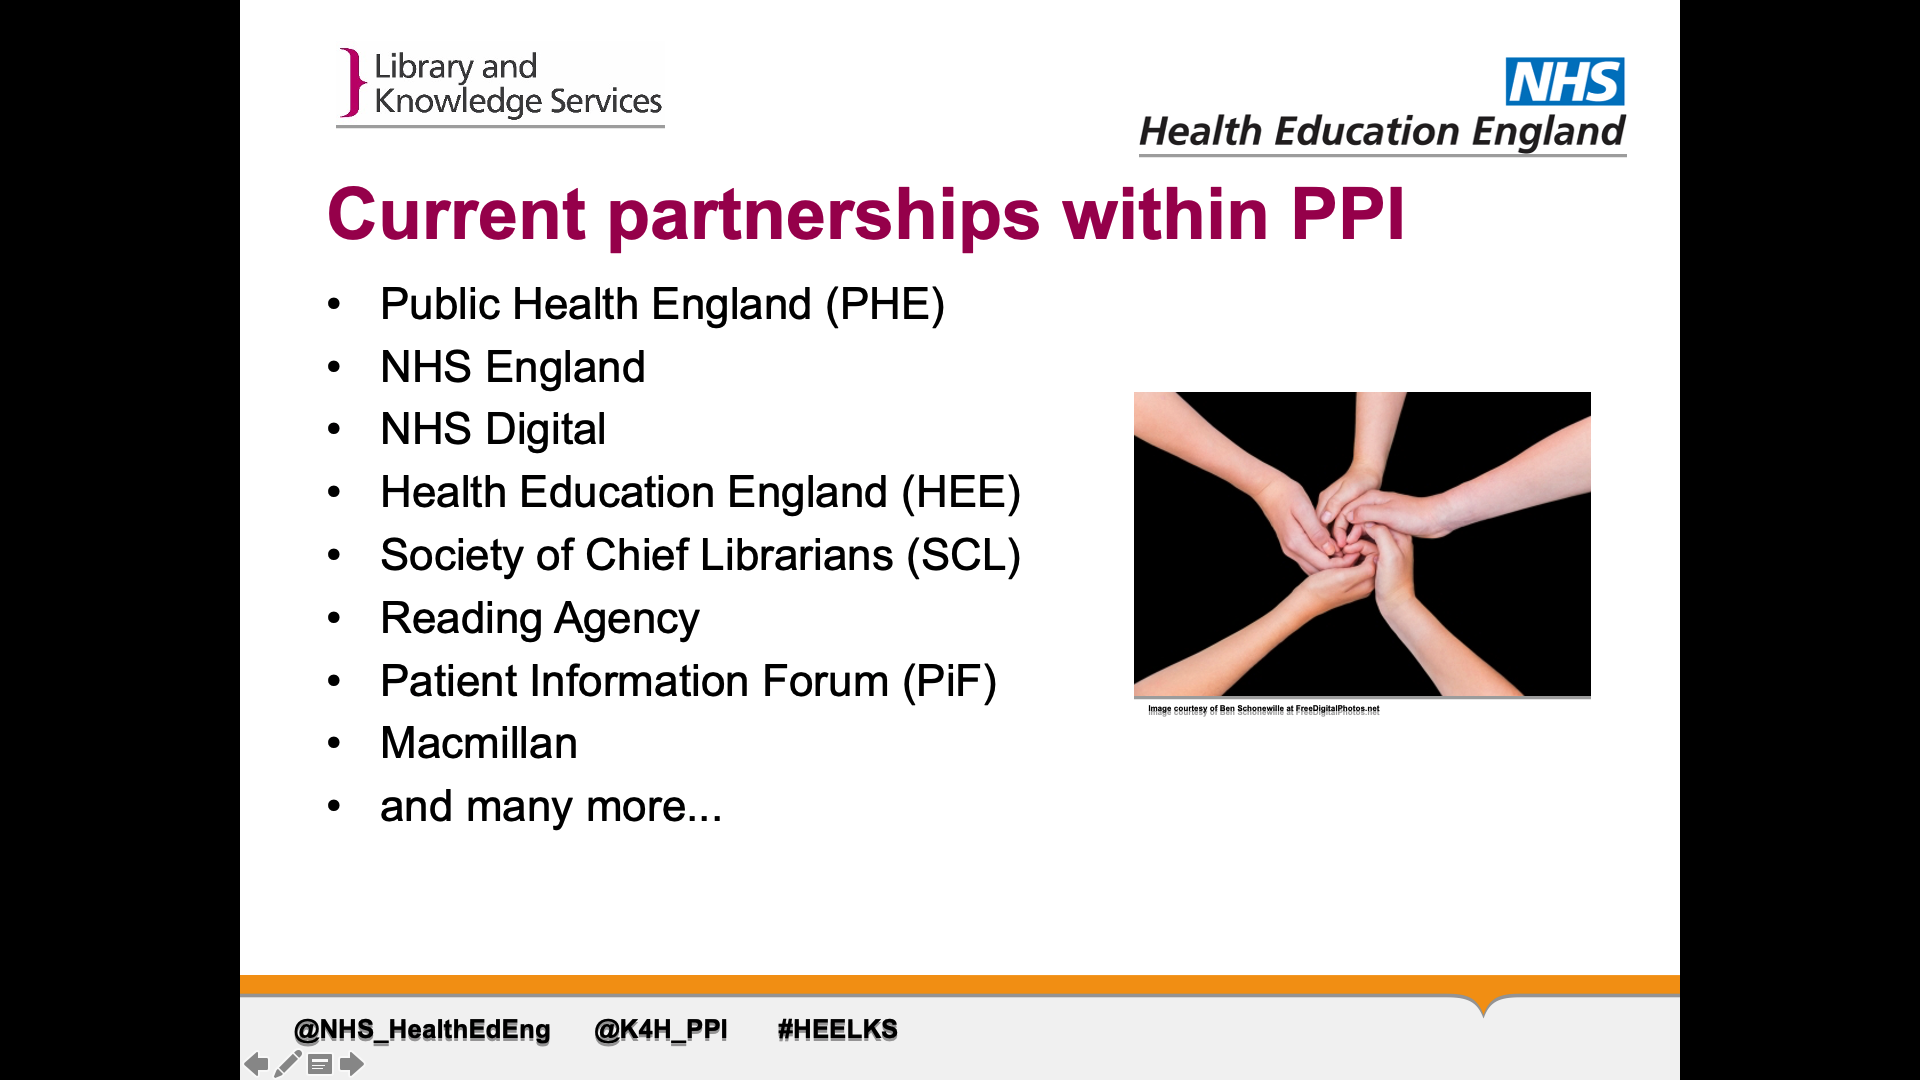 Title: Current partnerships within PPI. List of partnerships: Public Health England, NHS England, NHS Digital, Health Education England, Society of Chief Librarians, Reading Agency, Patient Information Forum, Macmillan, and many more...